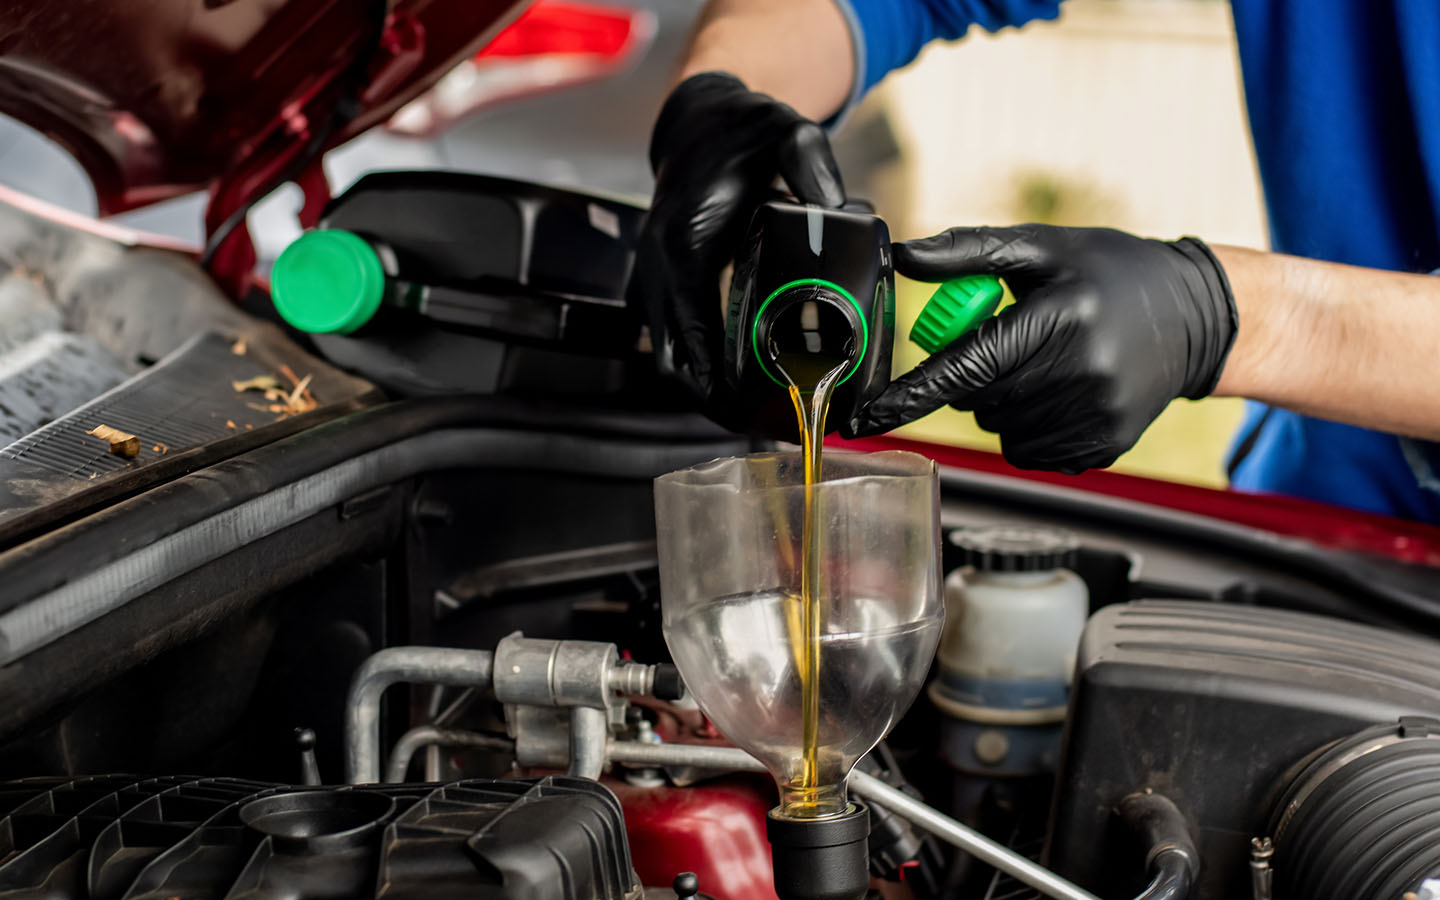 learn the process of Engine Flushing in Cars to keep the engine in good condition